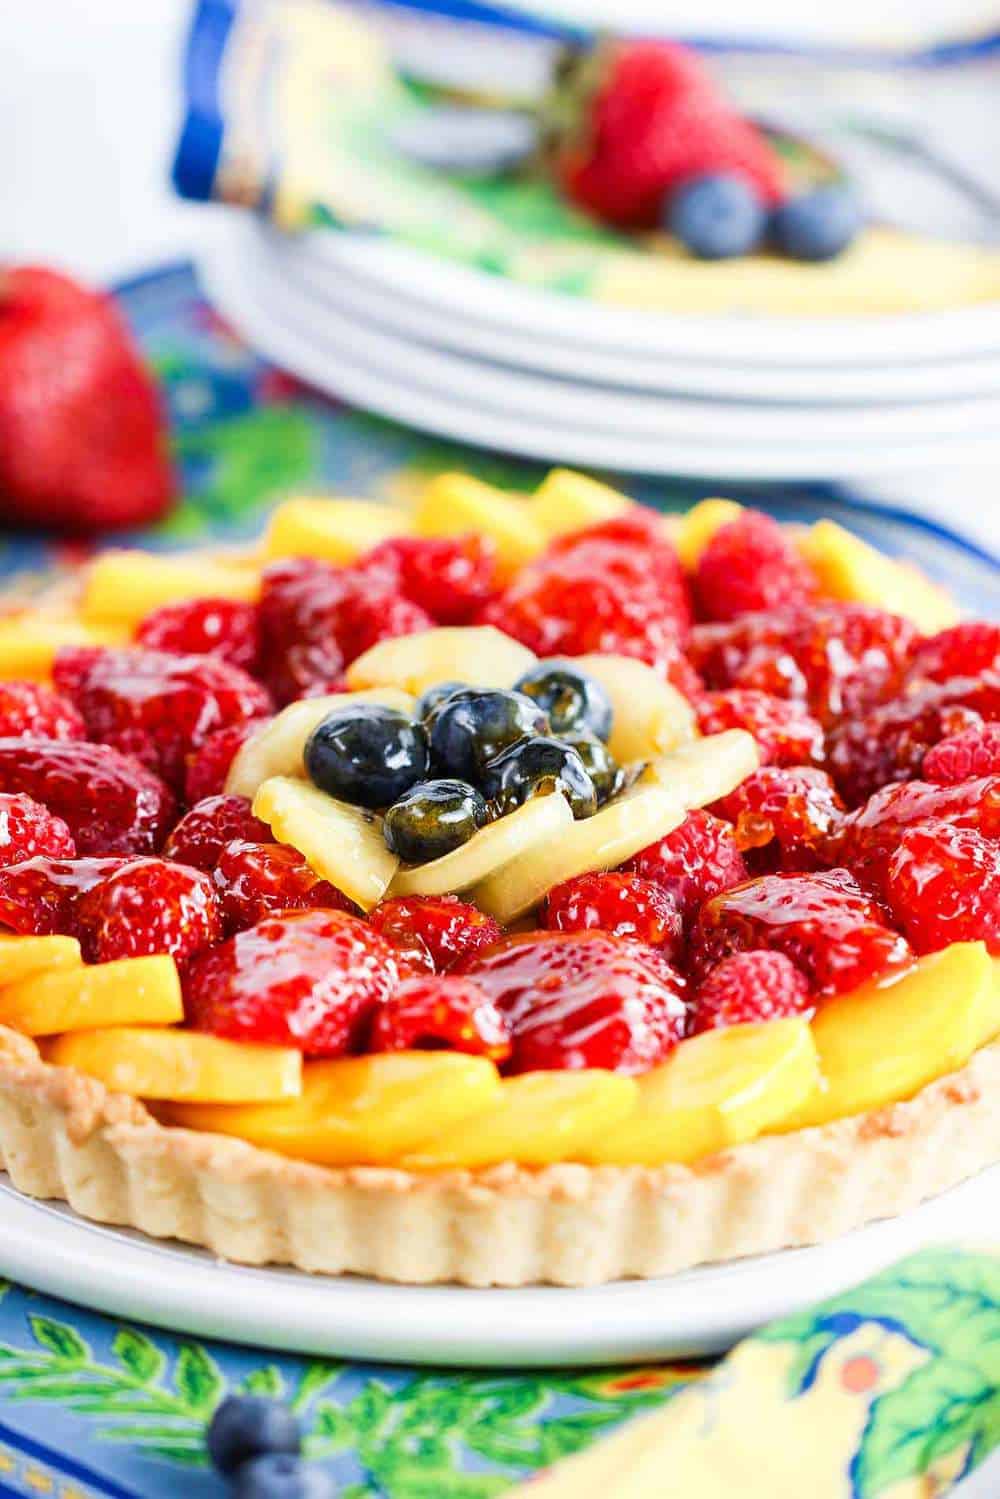 the fruit is layered beautifully in this classic fruit tart